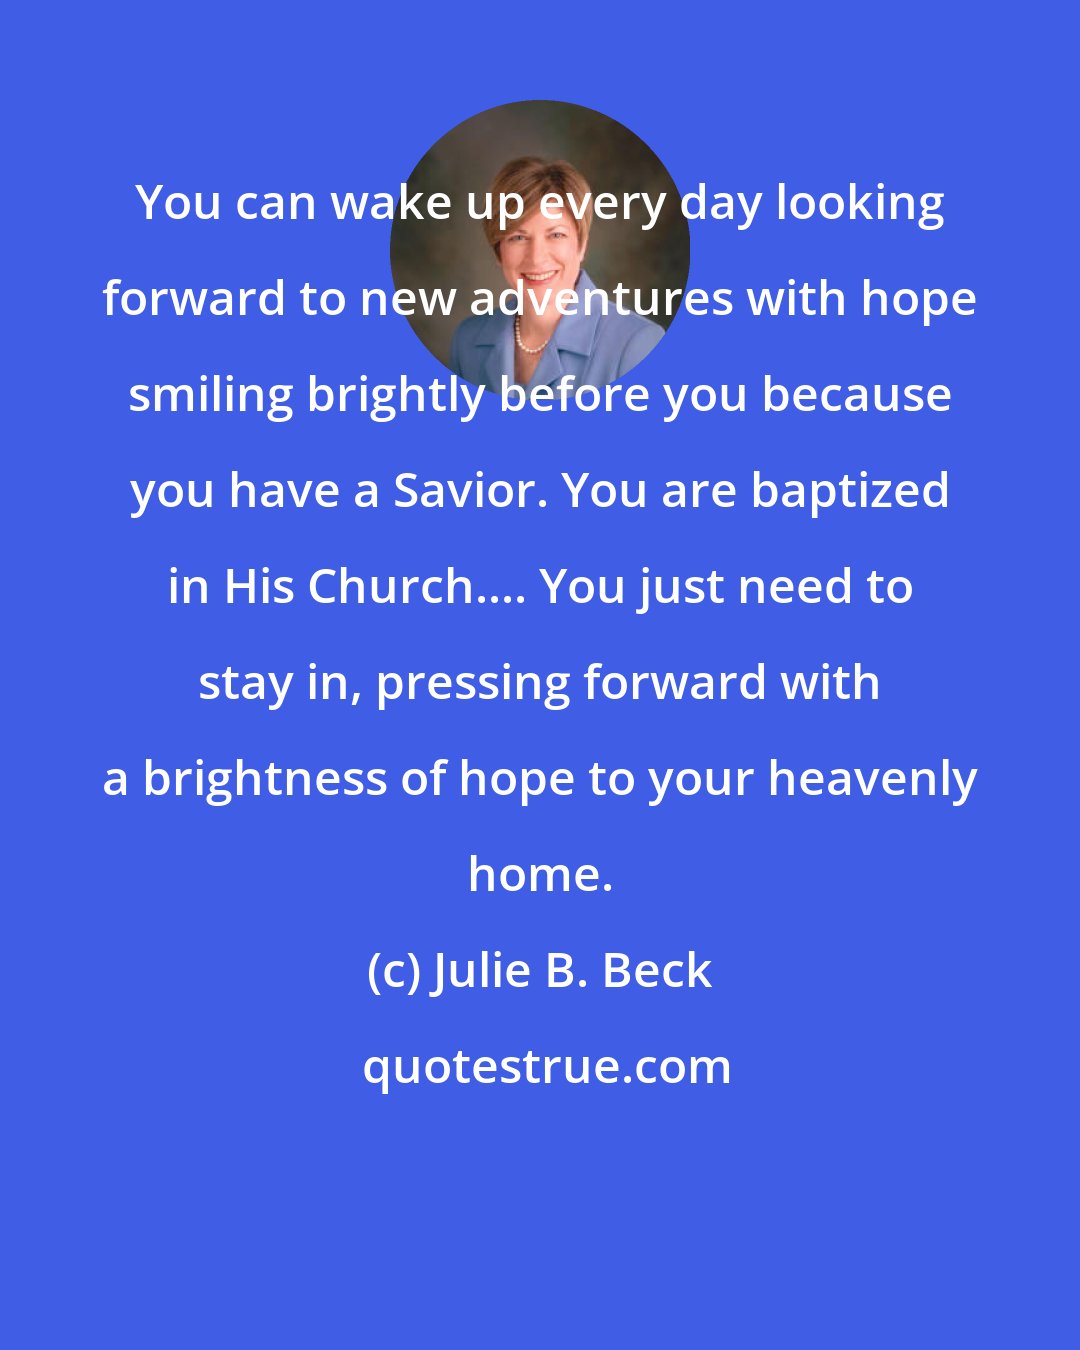 Julie B. Beck: You can wake up every day looking forward to new adventures with hope smiling brightly before you because you have a Savior. You are baptized in His Church.... You just need to stay in, pressing forward with a brightness of hope to your heavenly home.